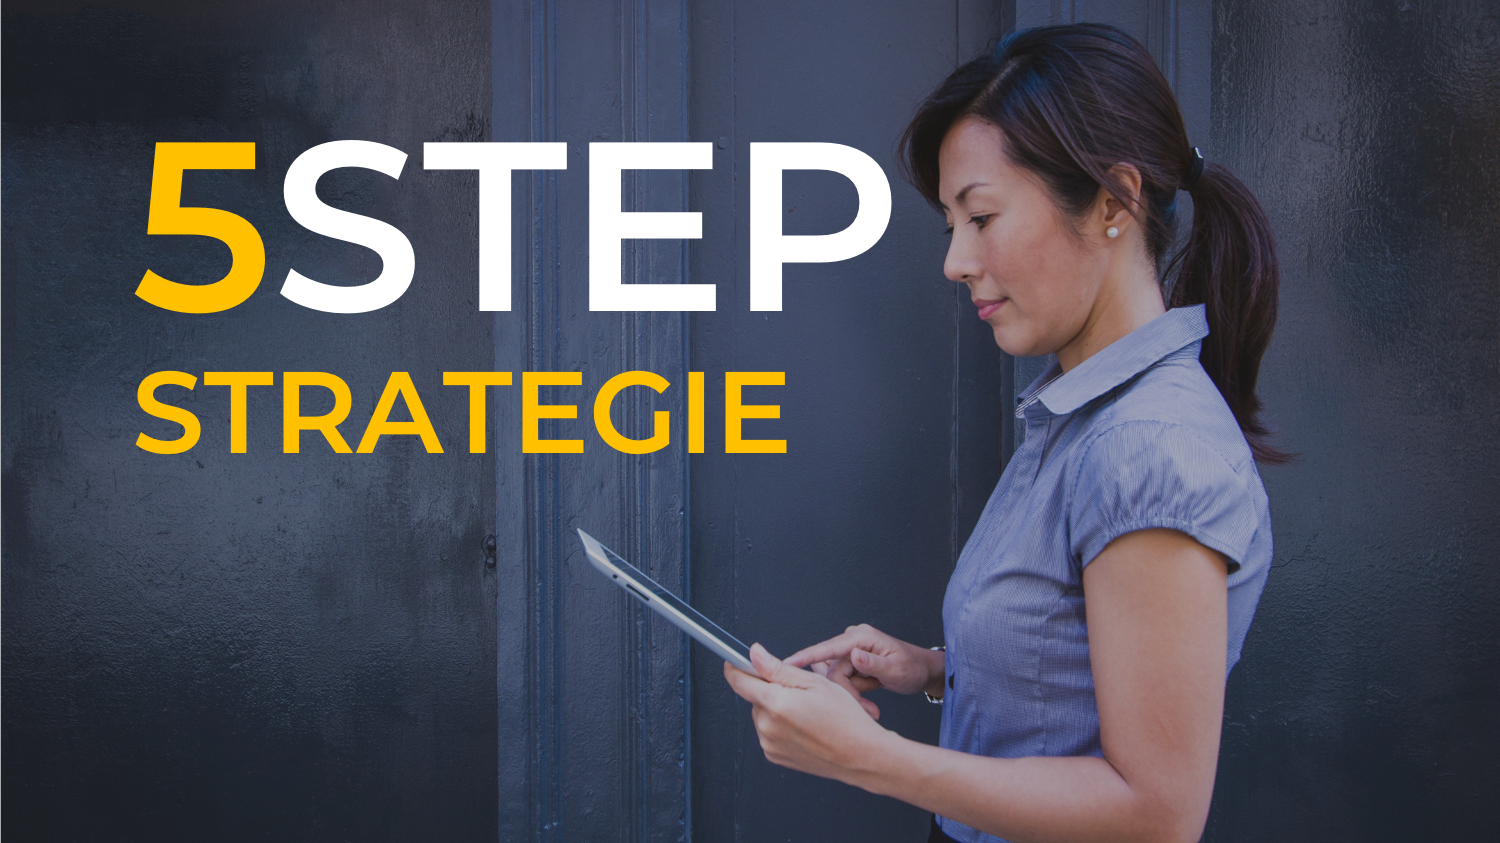 5STEP-Strategy HEADER _WOMAN.png